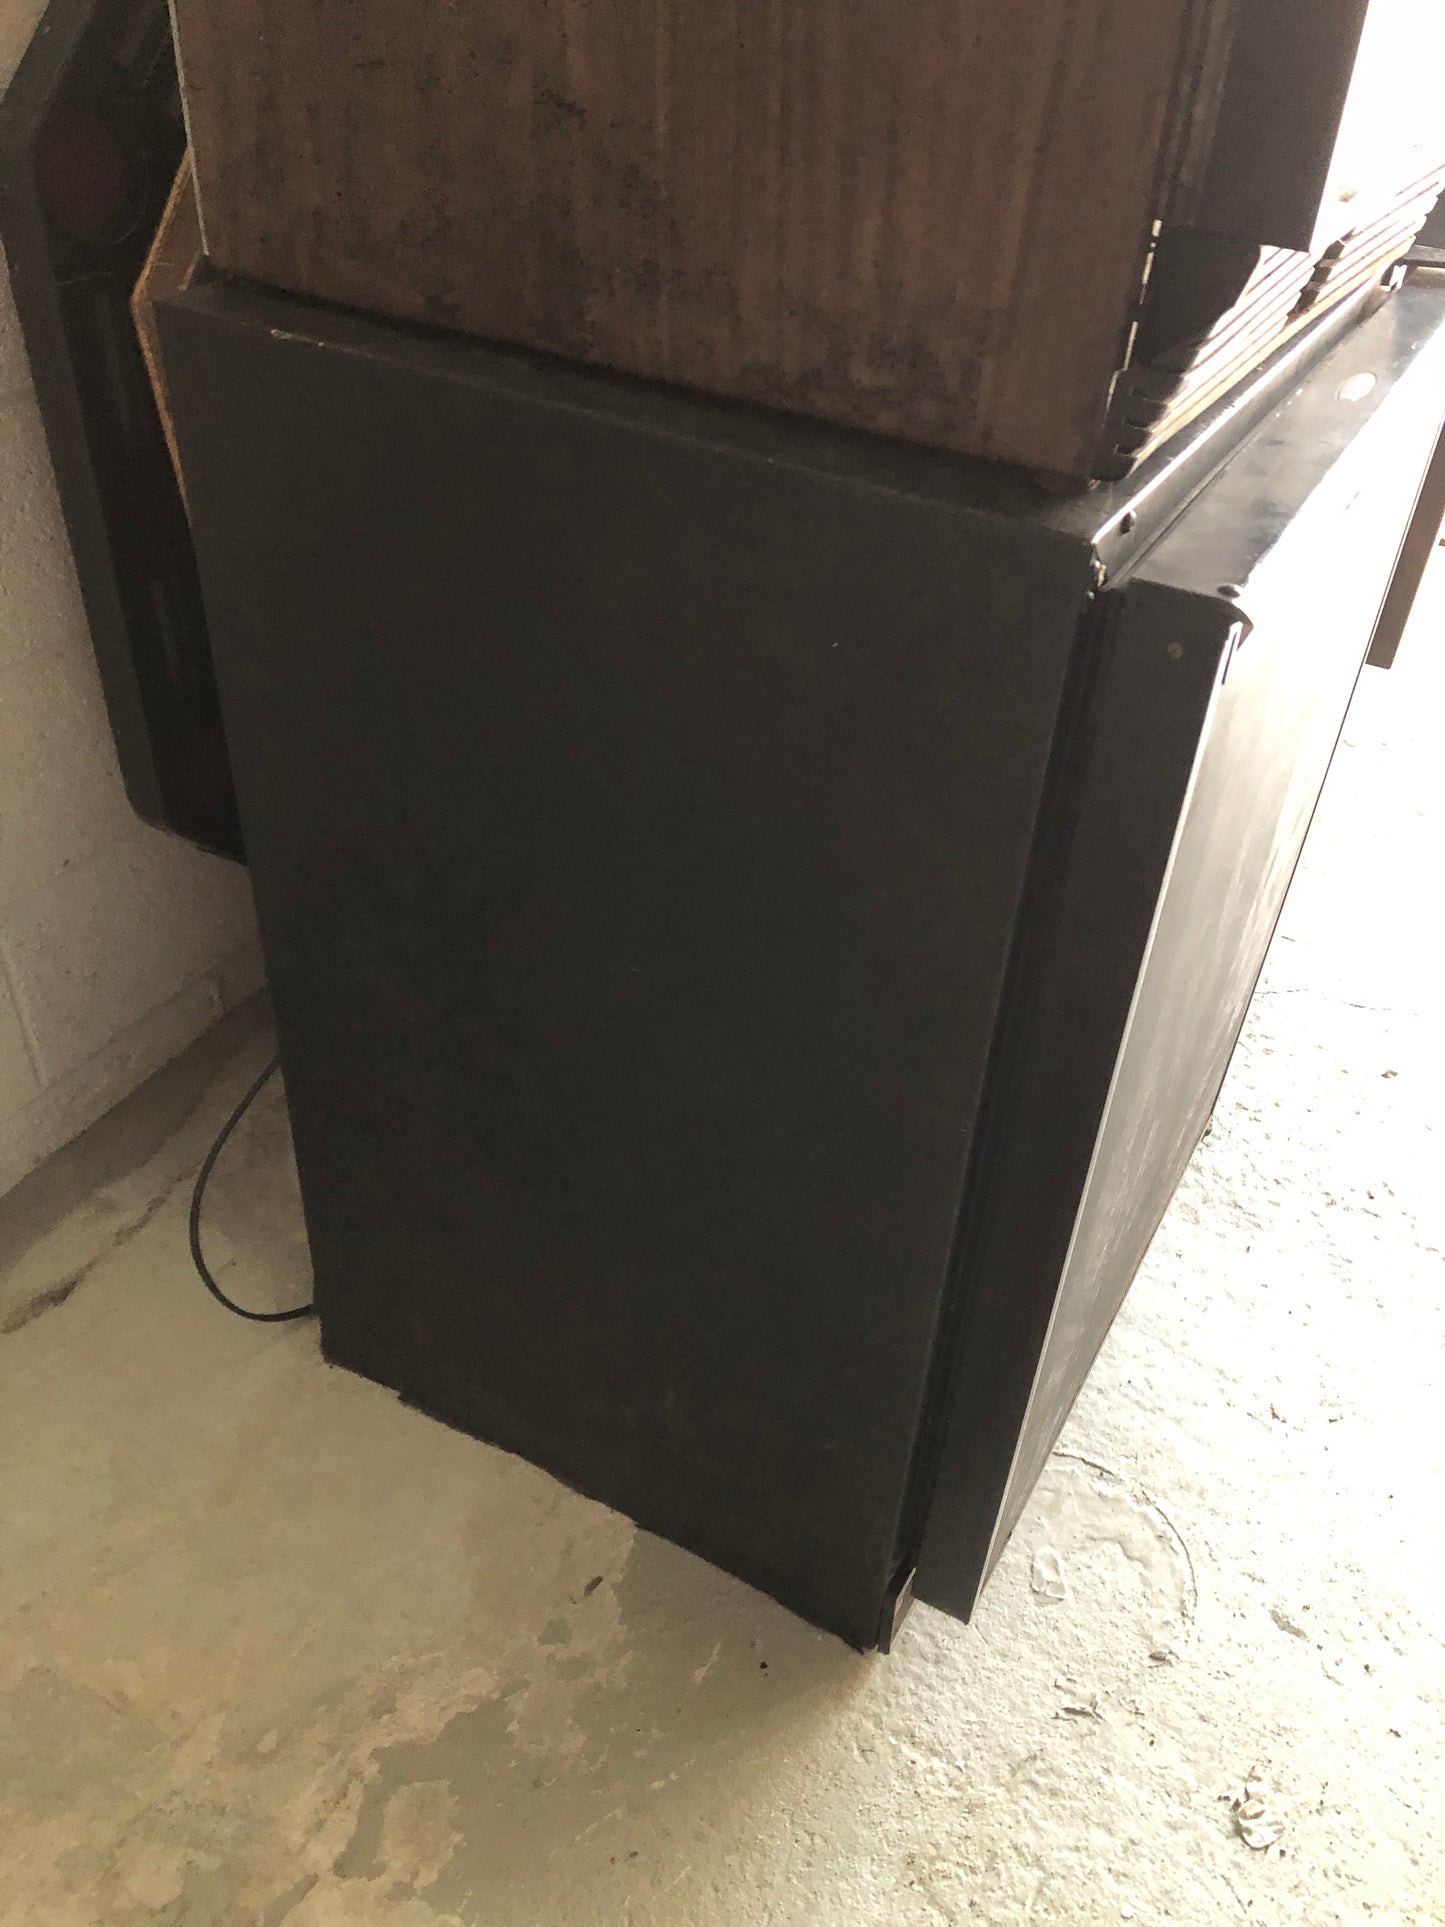 Used U-Line Mini Fridge - Dorm or Under Counter Size - Several Available